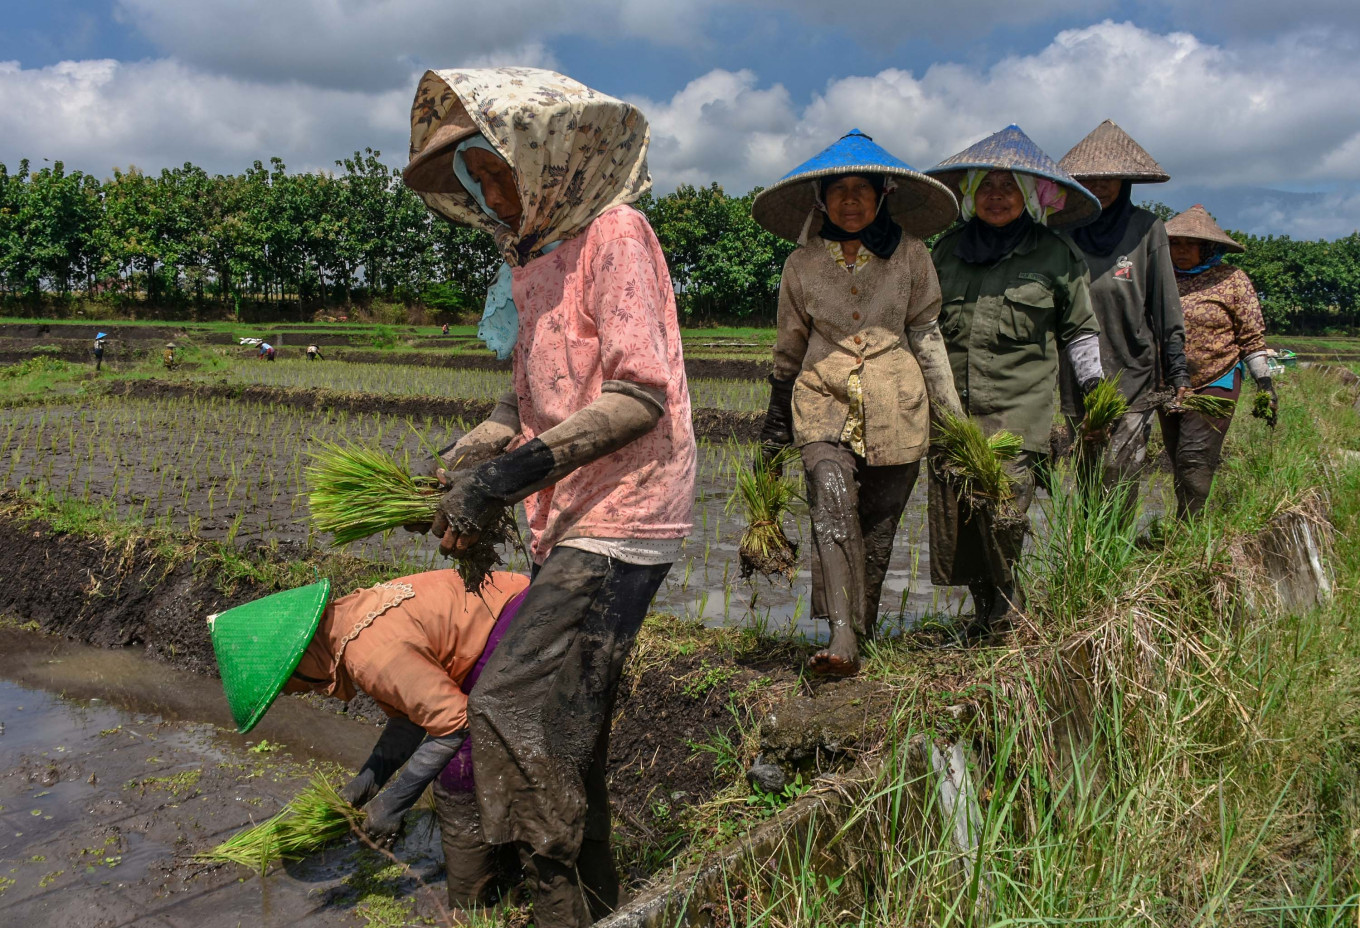 Farmers plant rice during the second planting season in 2020 amid the COVID-19 pandemic near the village of Tunggulwulung in Malang, East Java, on April 10. (JP/Aman Rochman)